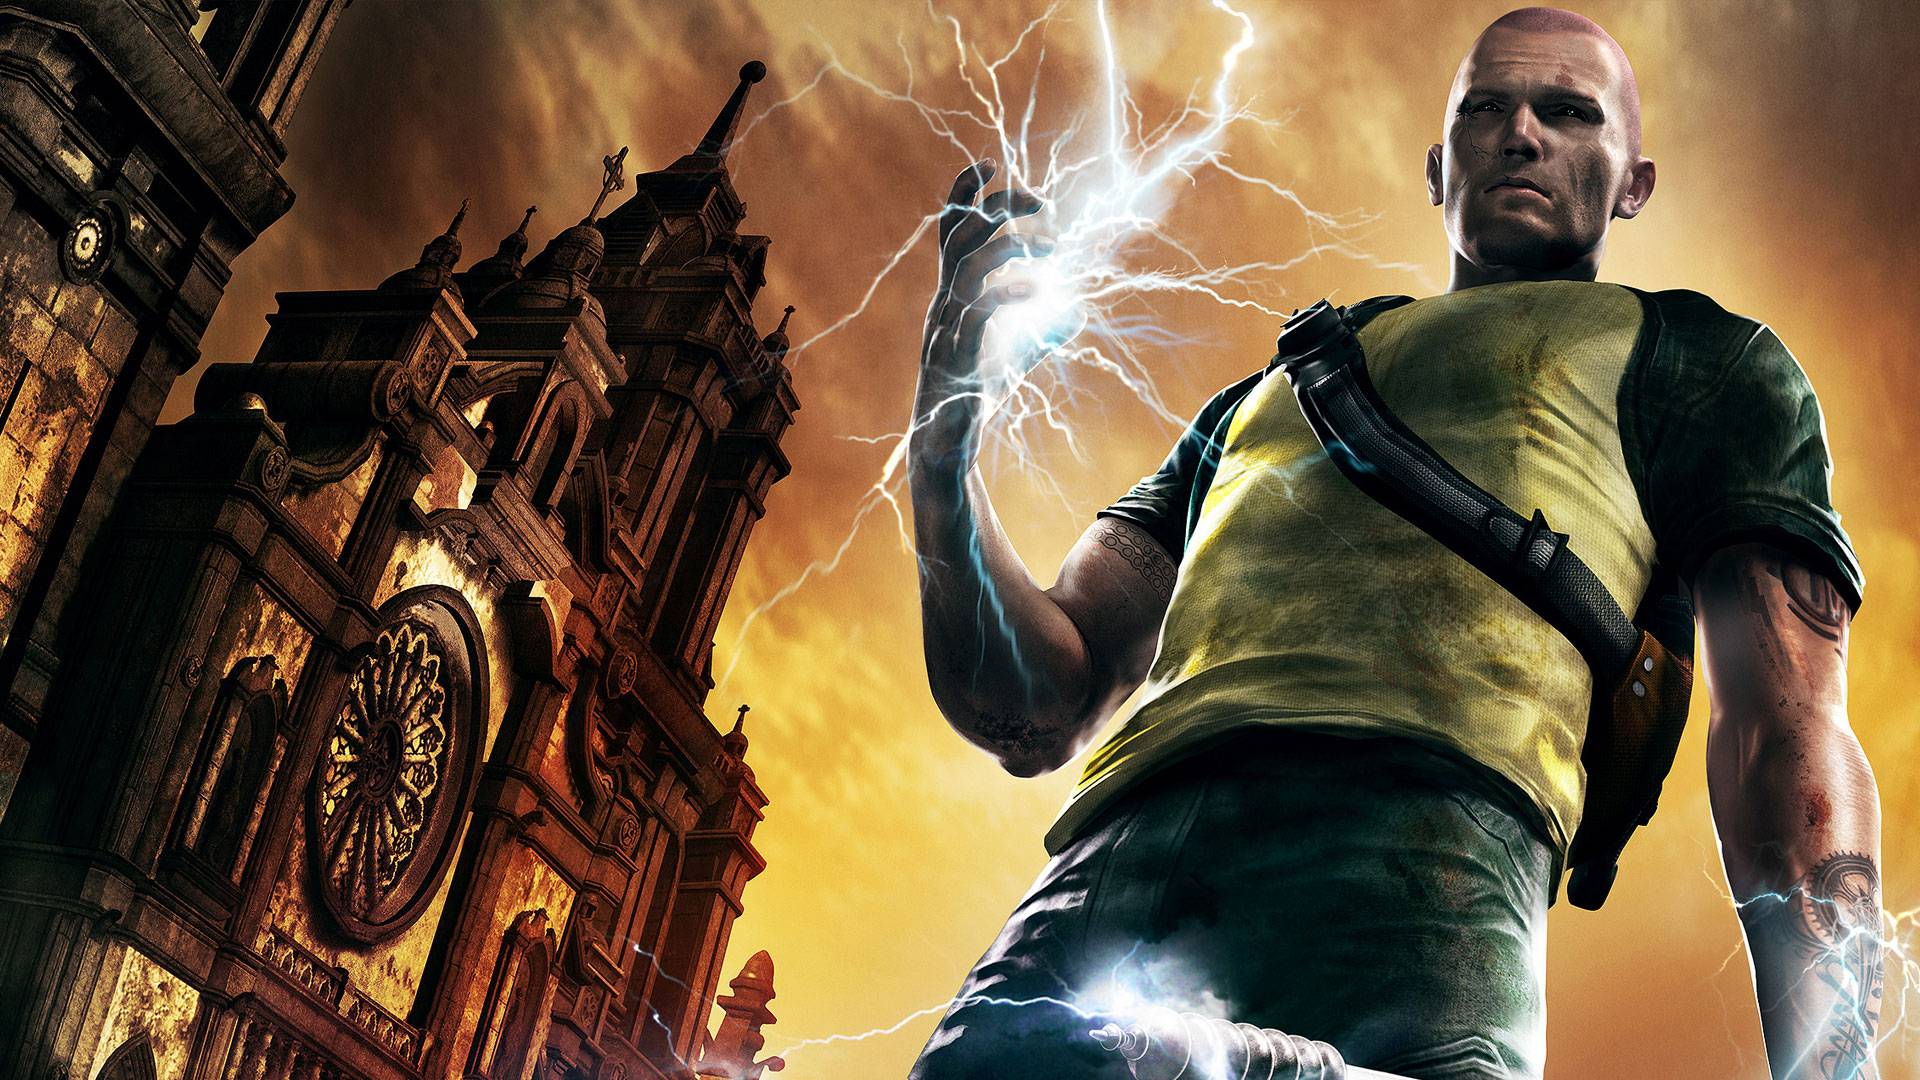 download infamous 2 steam for free